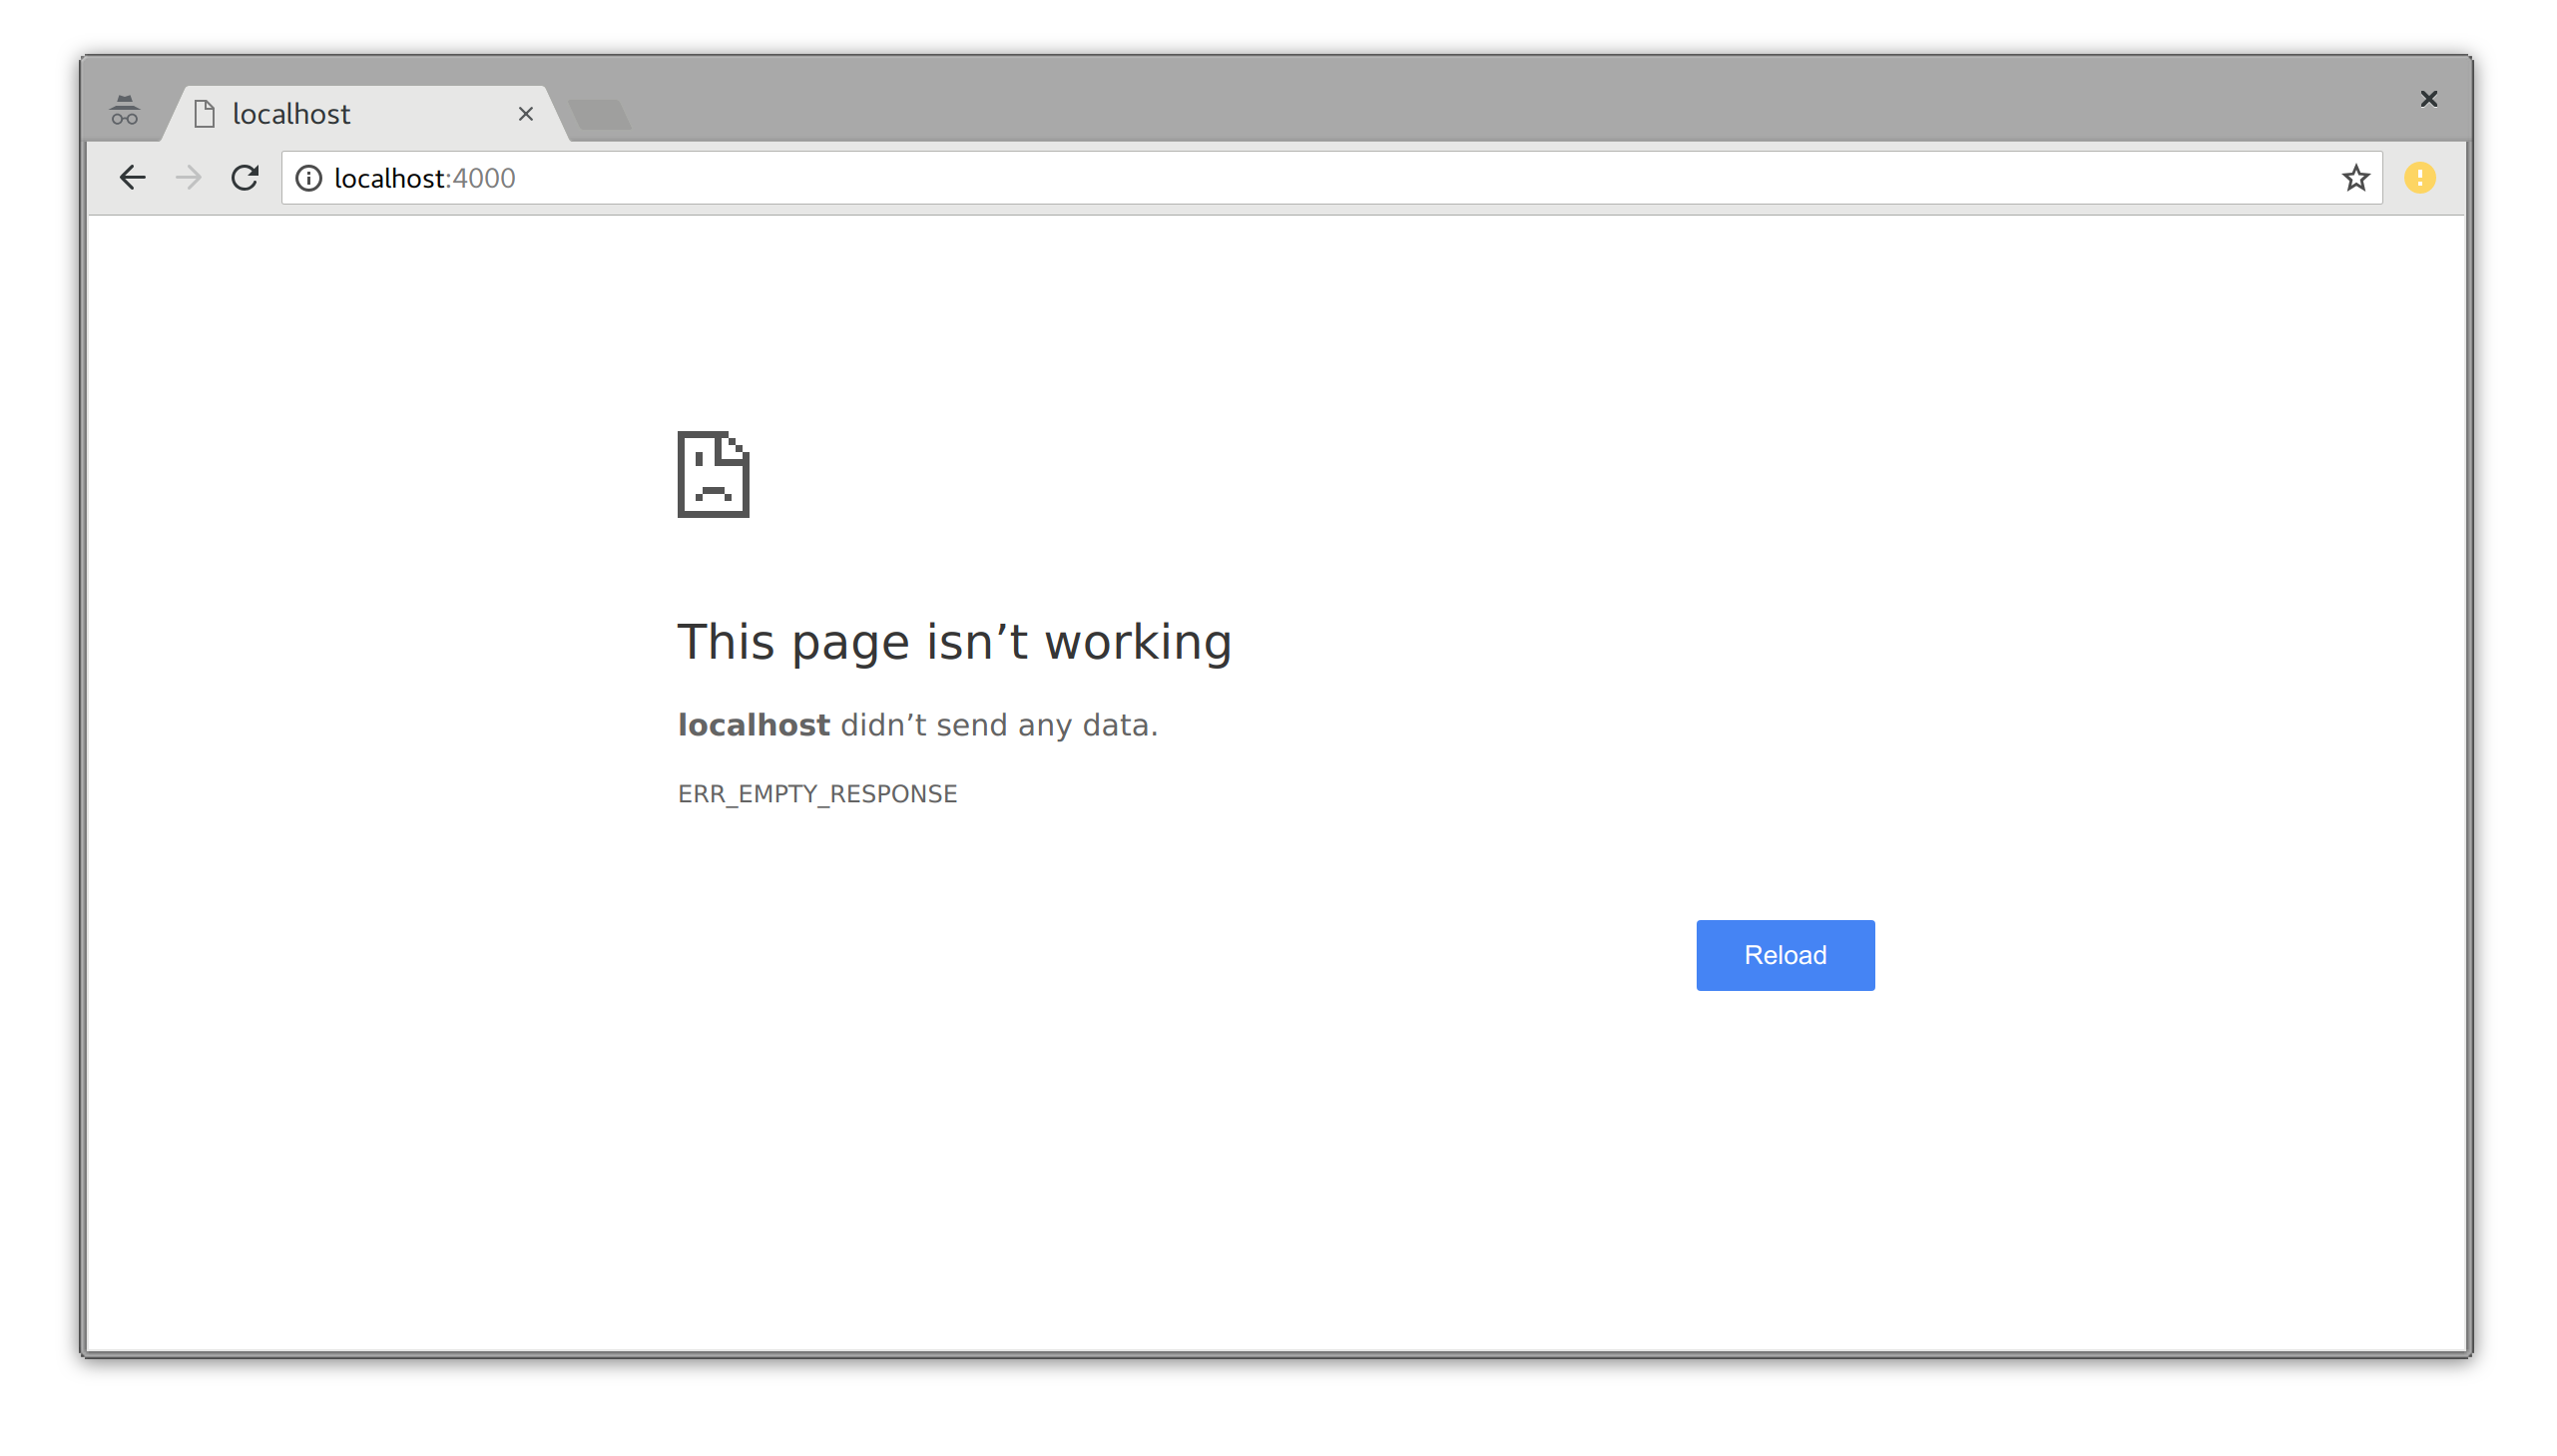 User sees blank page with
'This page isn't working' message in browser